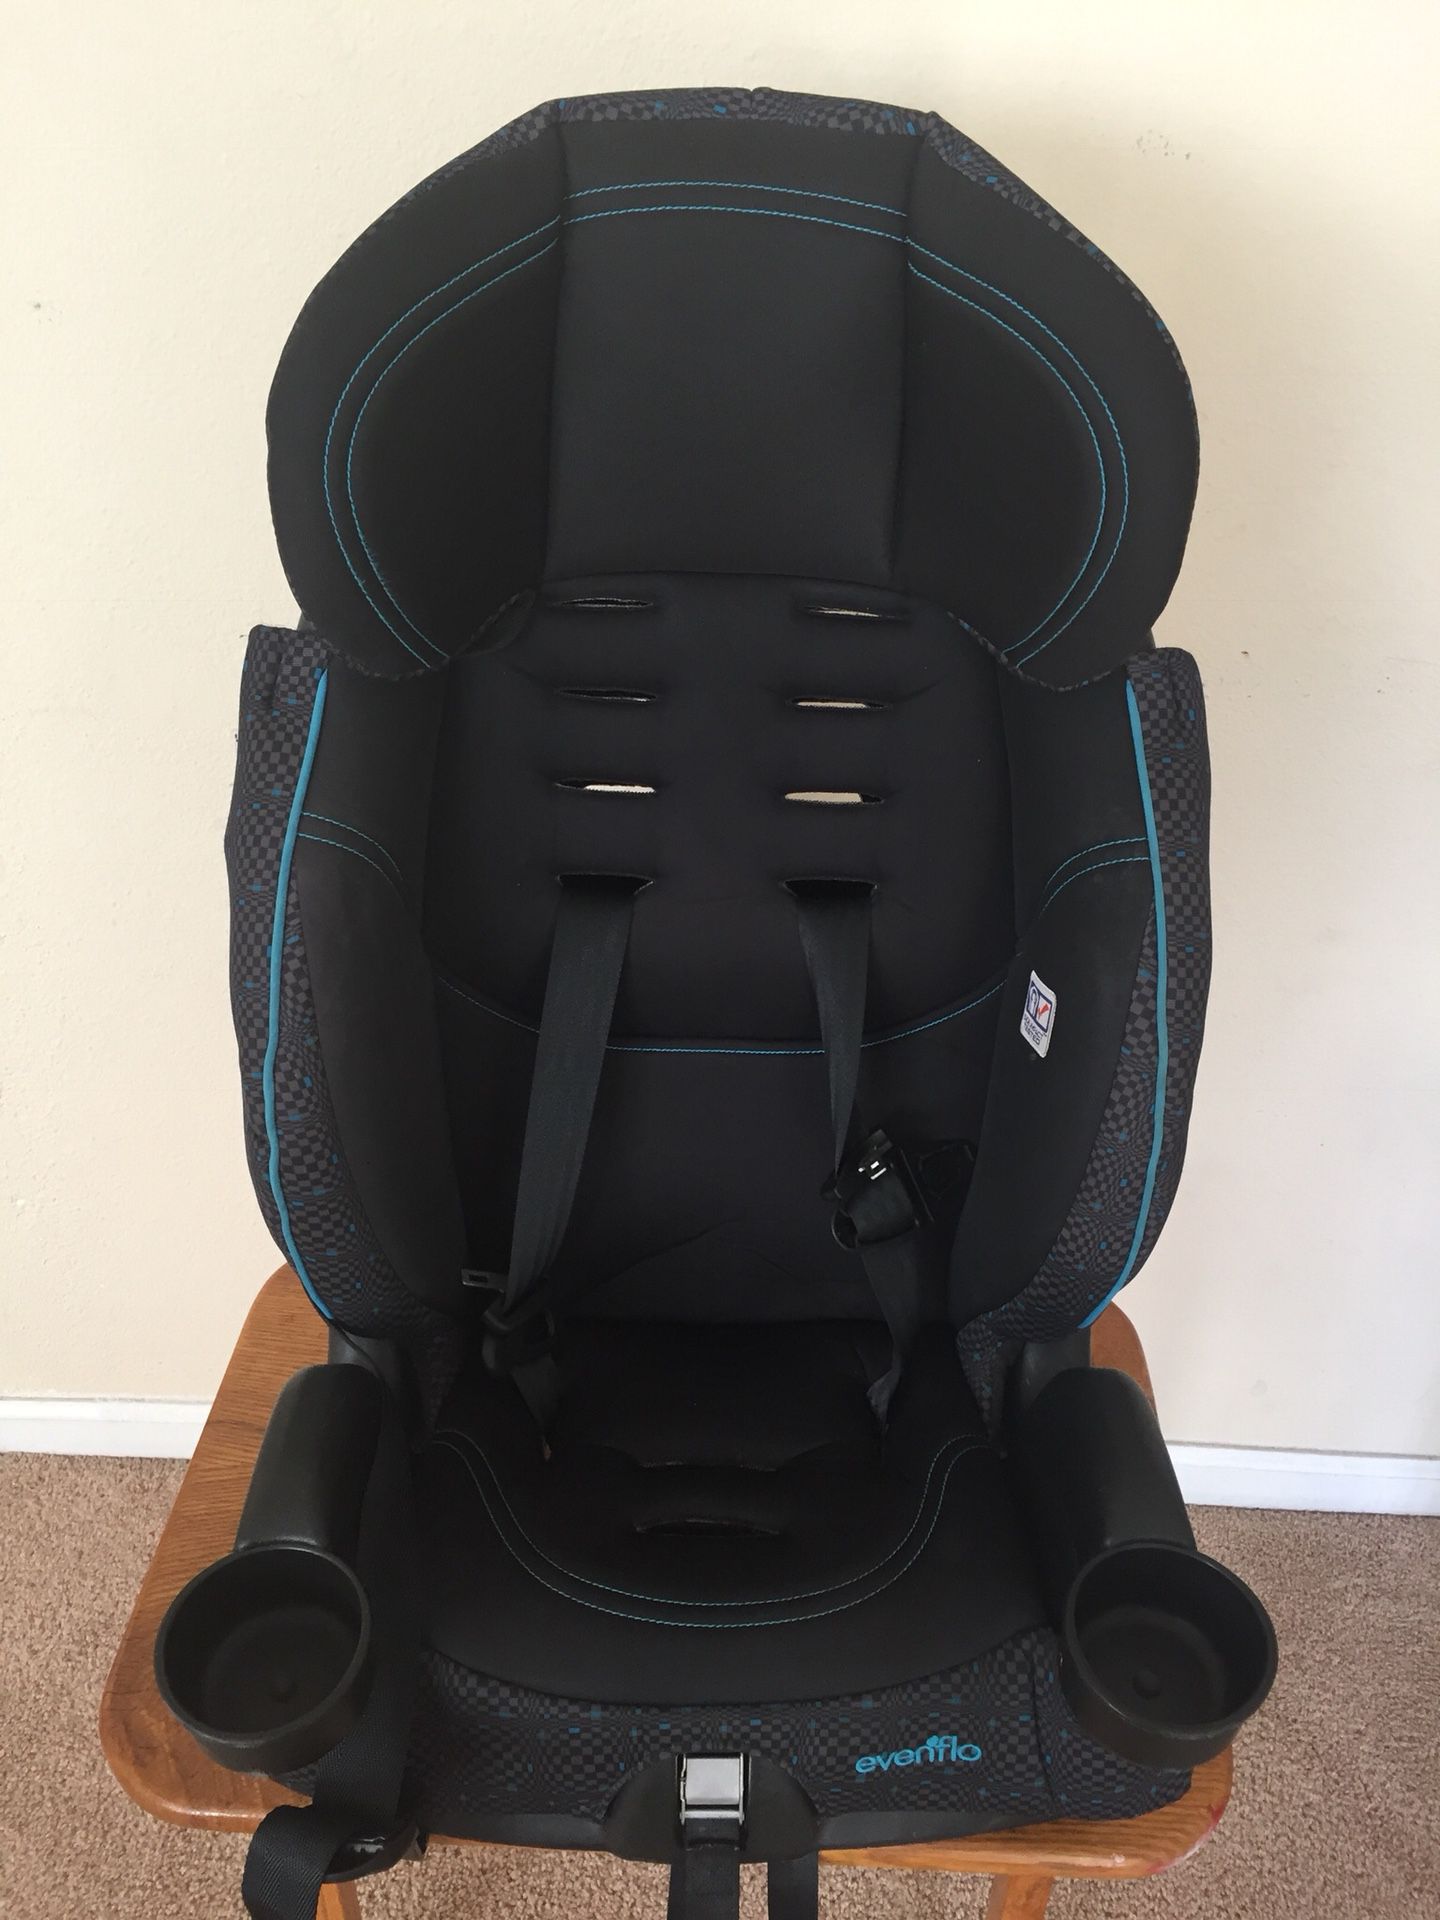 Everflo Car Seat in good condition with car seat protector